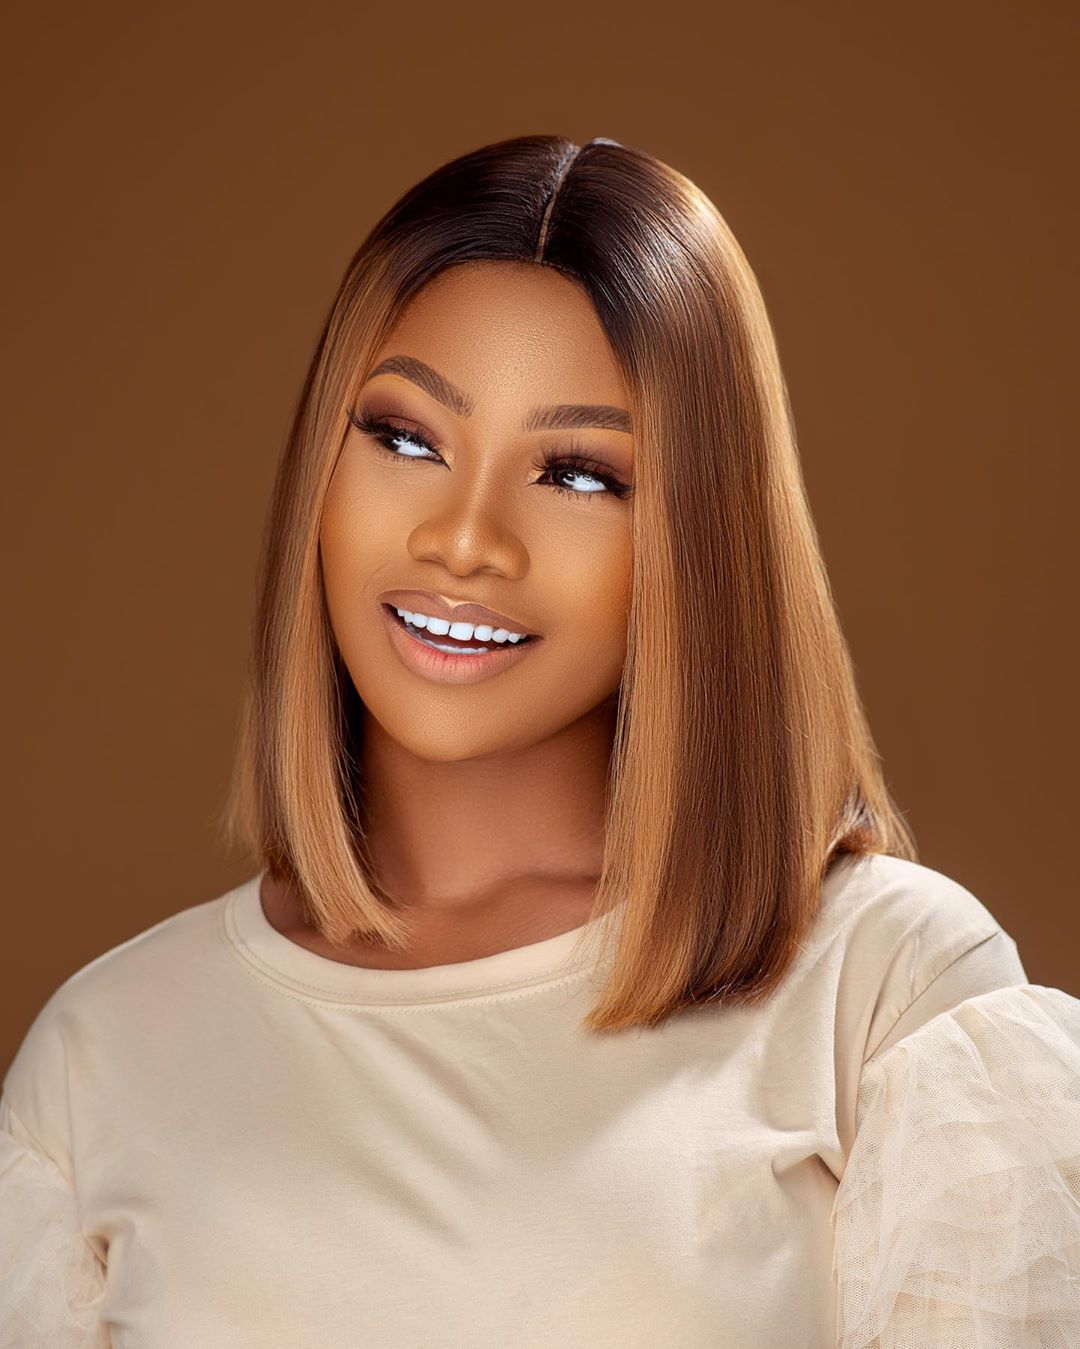 I was offered N18m to sit at the same table as a male fan - Tacha